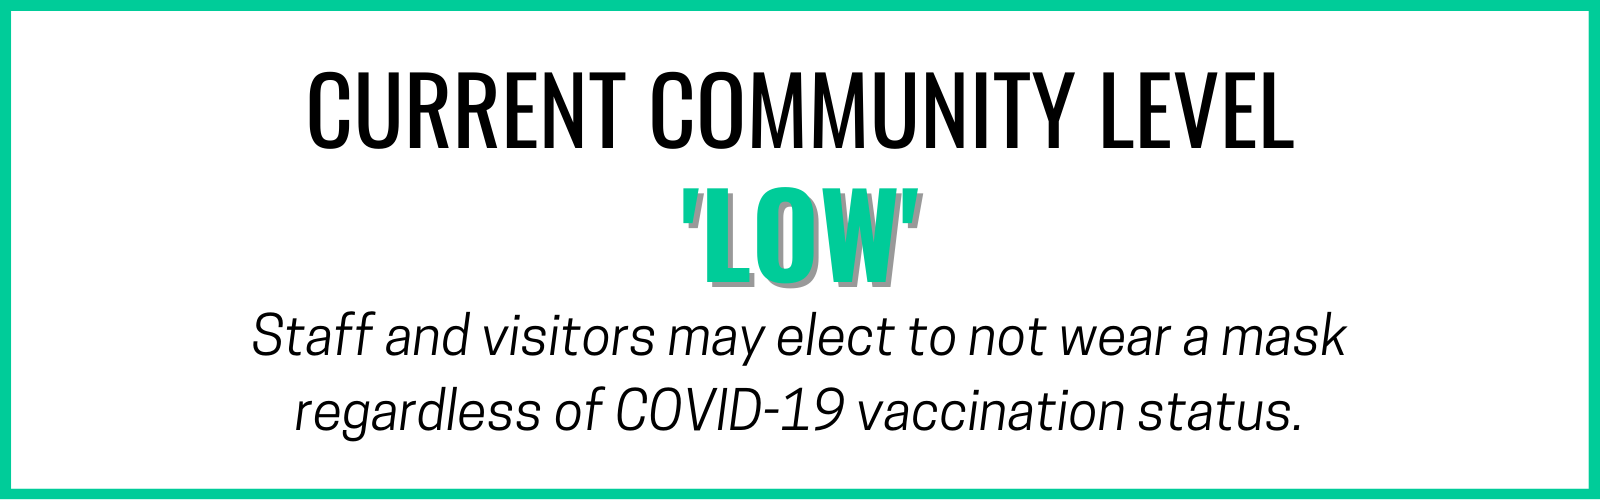 Current Community Level is Low:  Staff and visitors may elect to not wear a mask regardless of COVID-19 vaccination status.